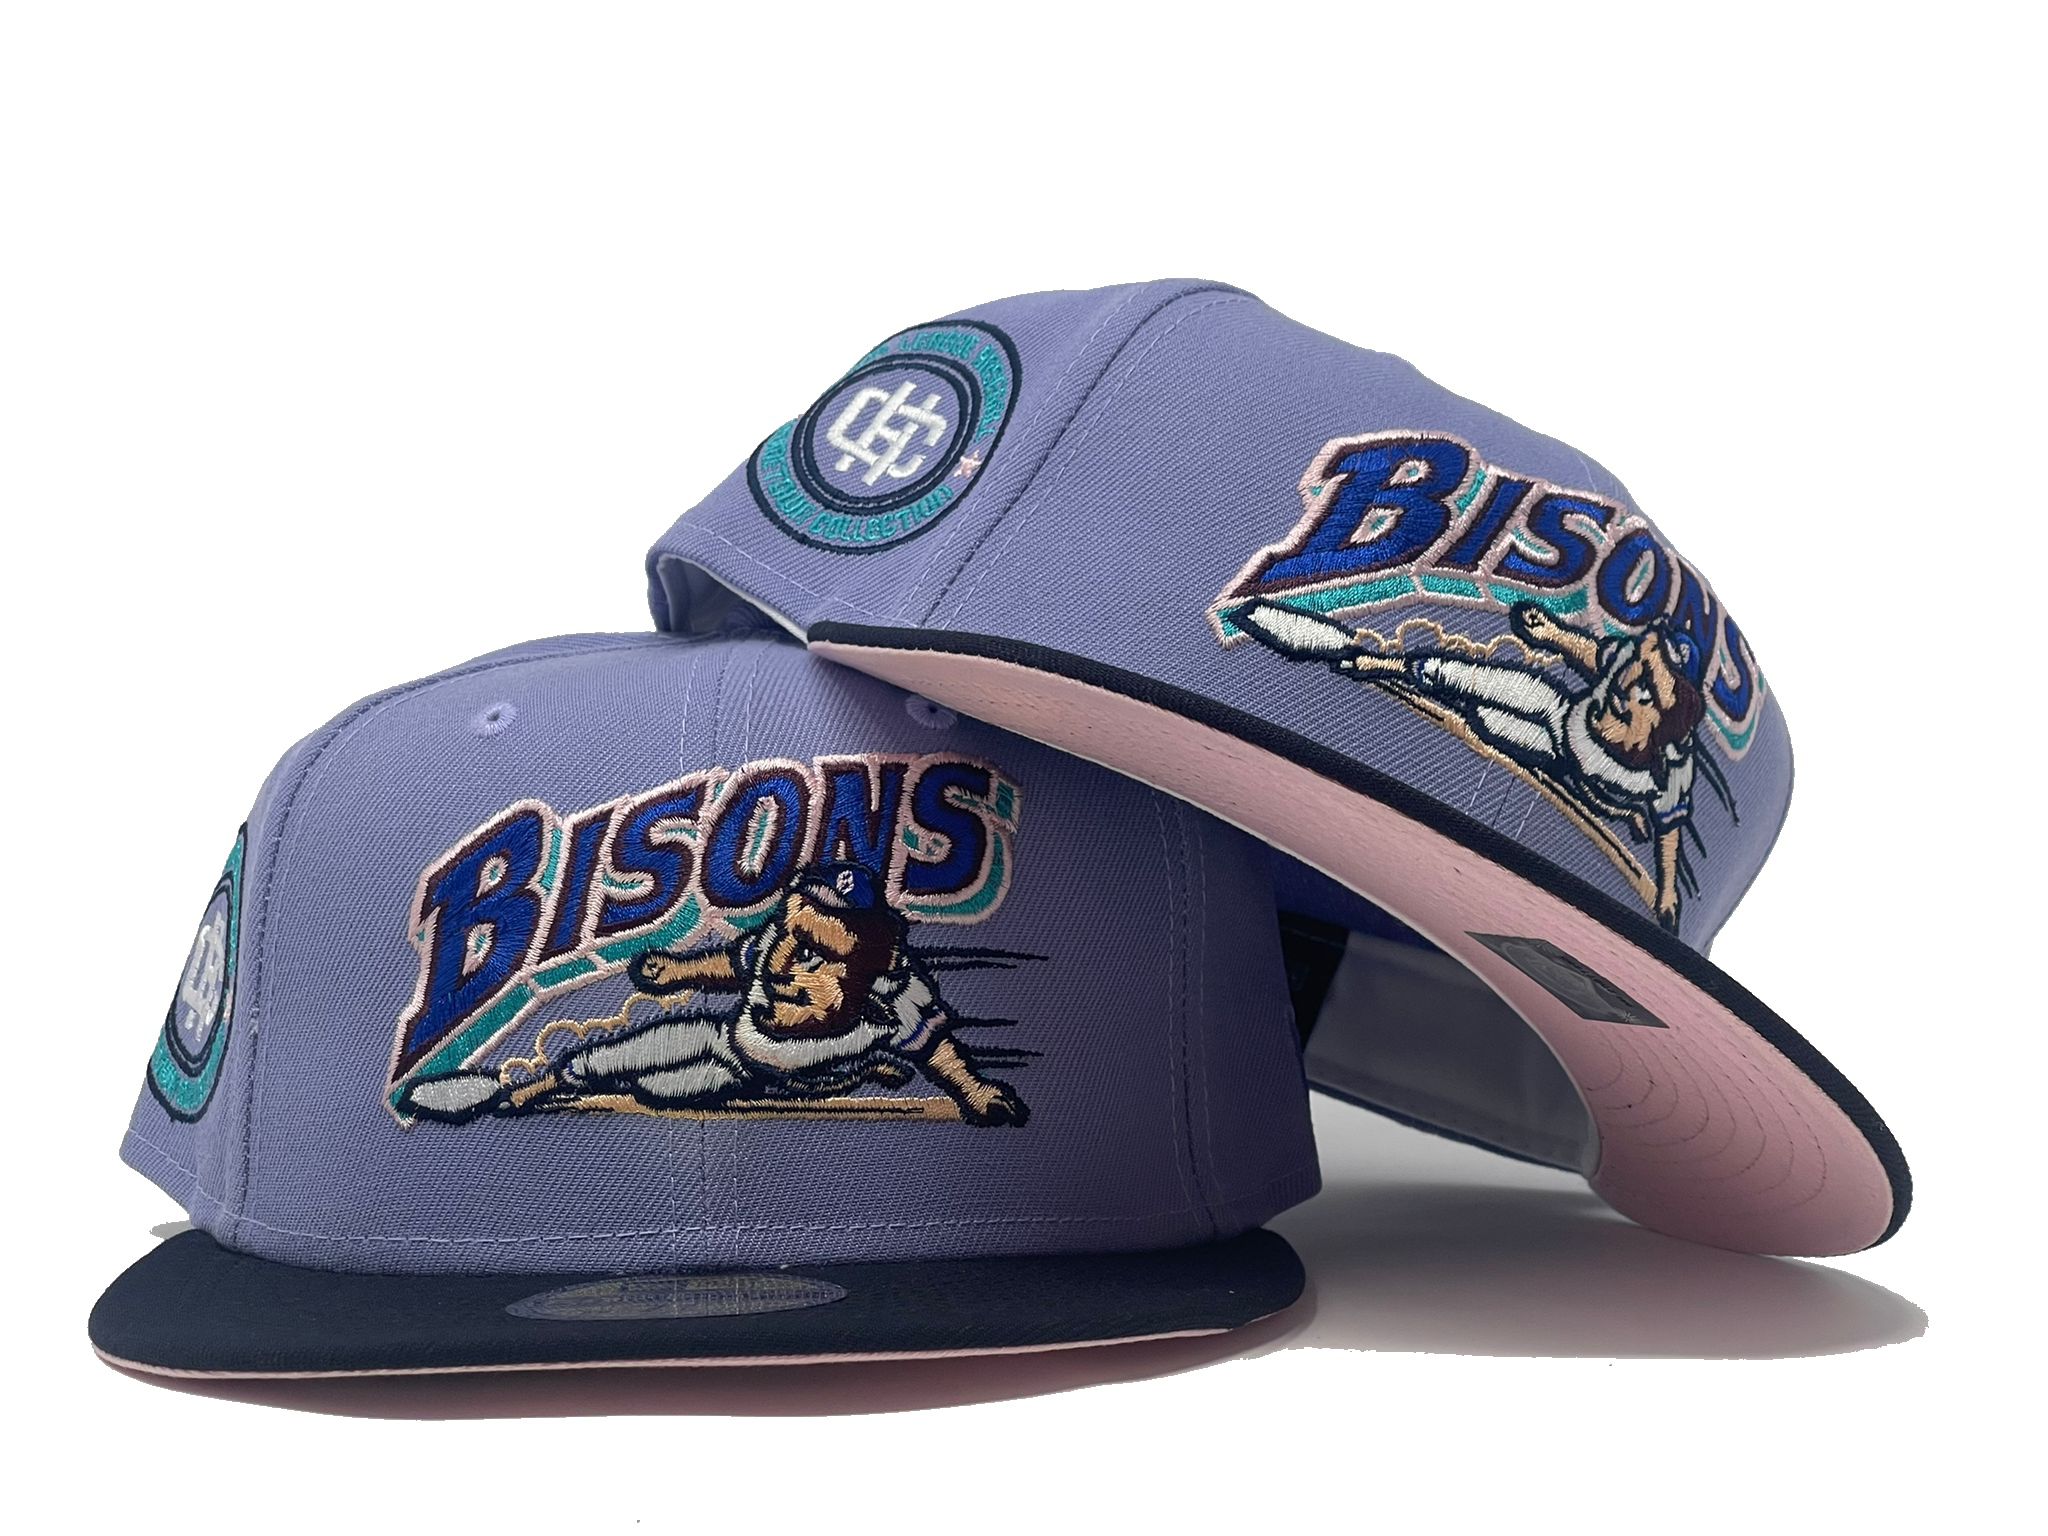 Buffalo Bisons Lax Night 3930 Cap – Buffalo Bisons Official Store